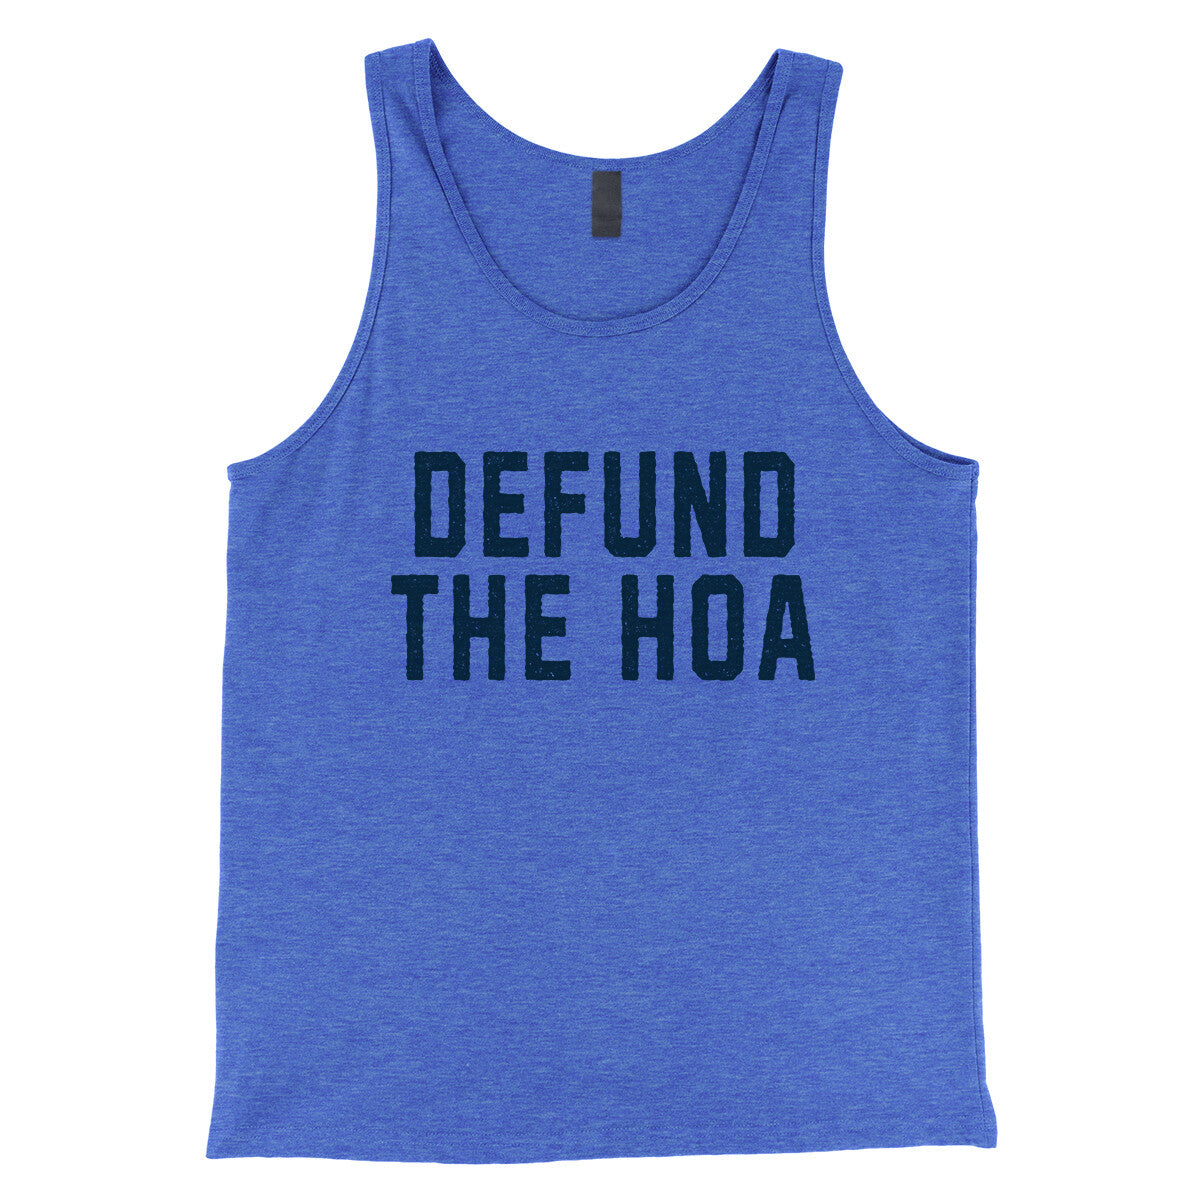 Defund the HOA in True Royal TriBlend Color